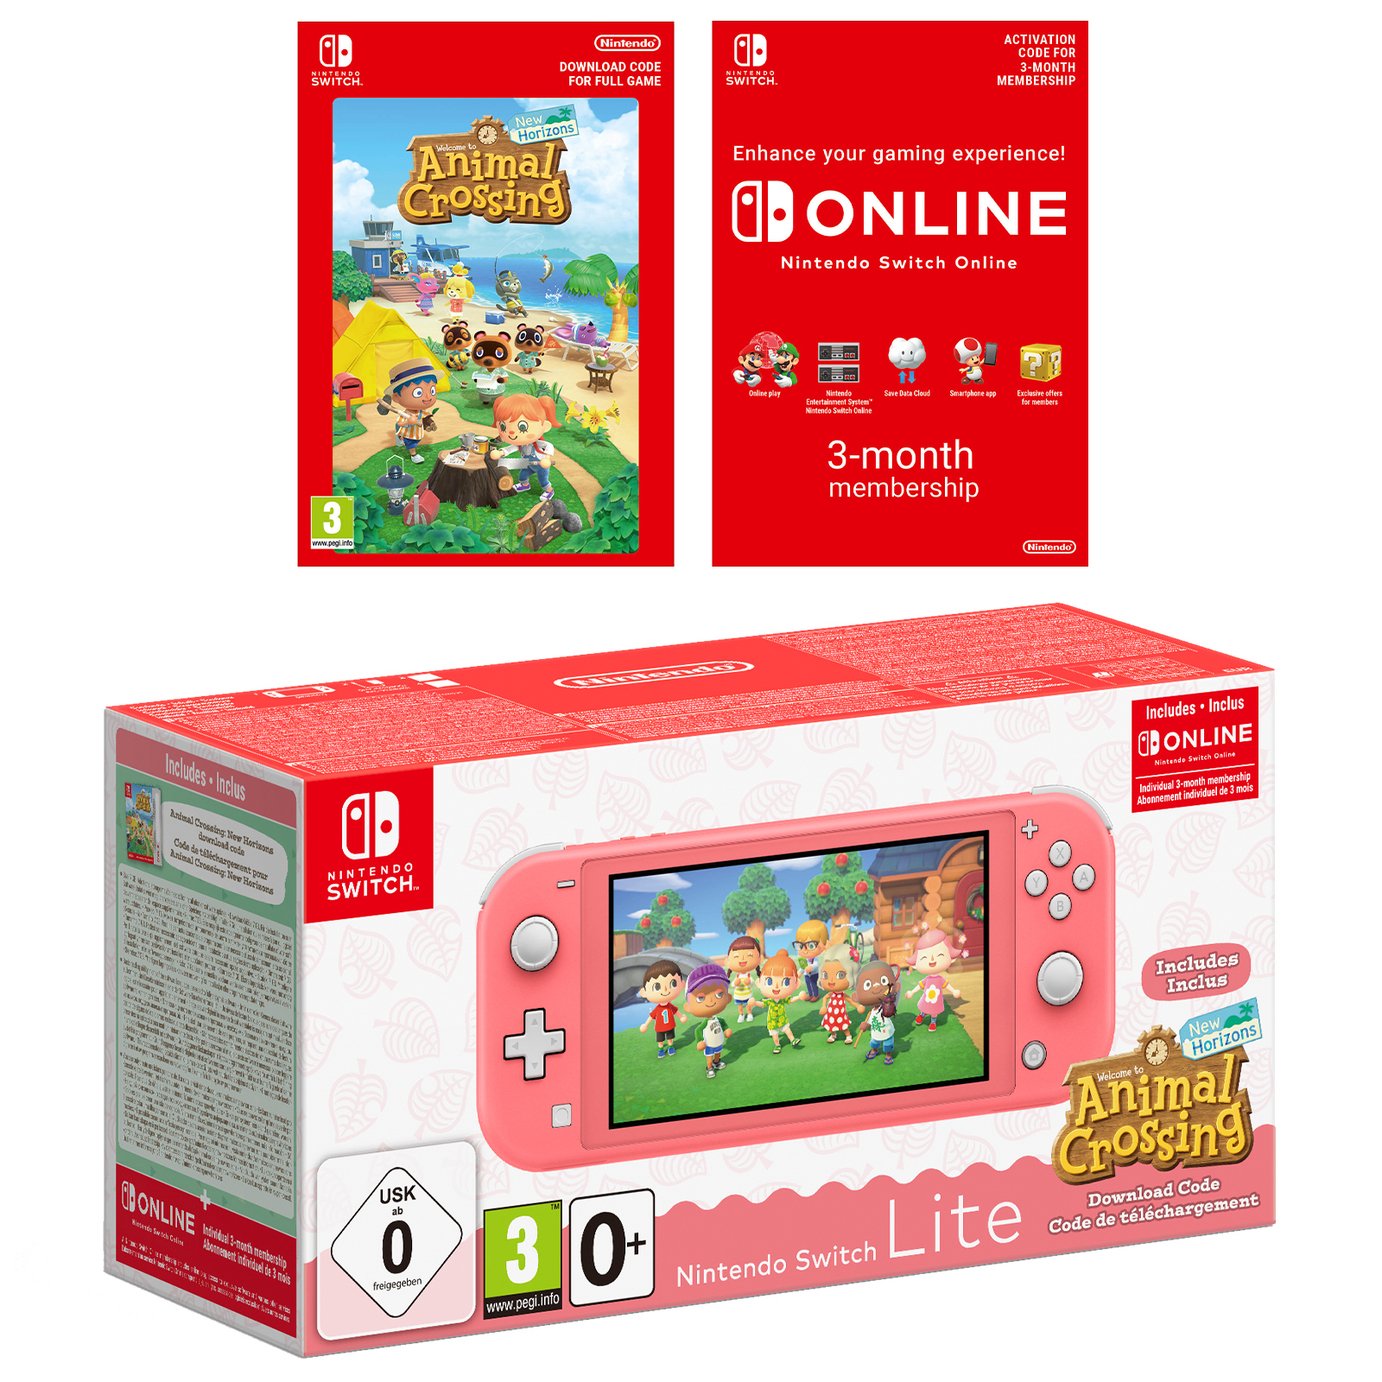 switch lite coral price